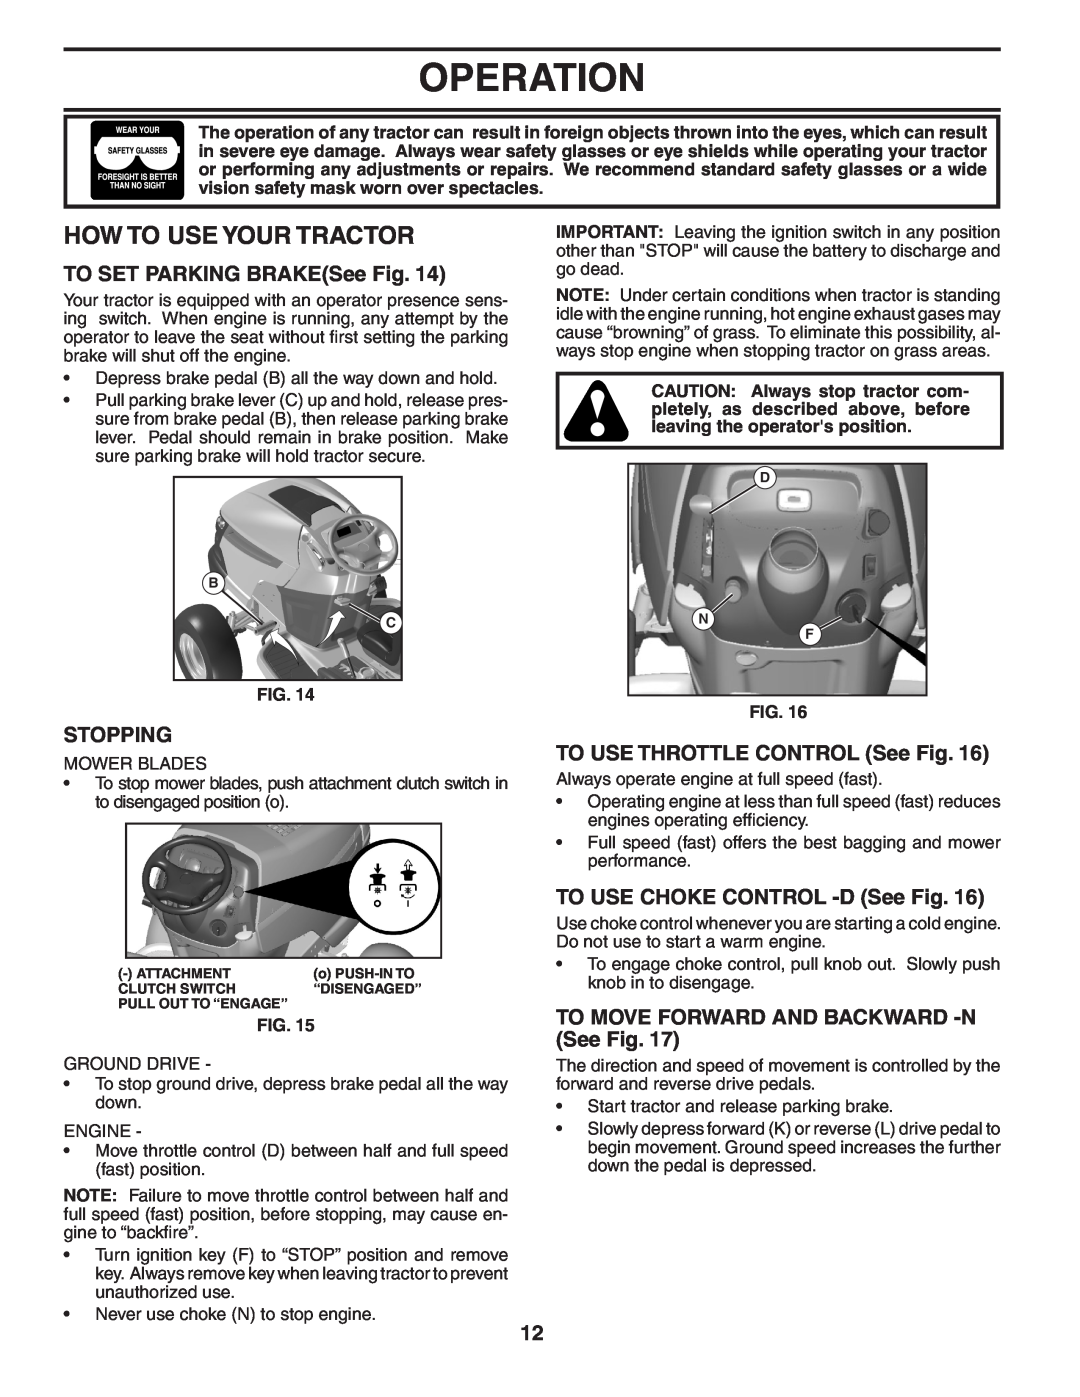 Poulan 402464 How To Use Your Tractor, TO SET PARKING BRAKESee Fig, Stopping, TO USE THROTTLE CONTROL See Fig, Operation 